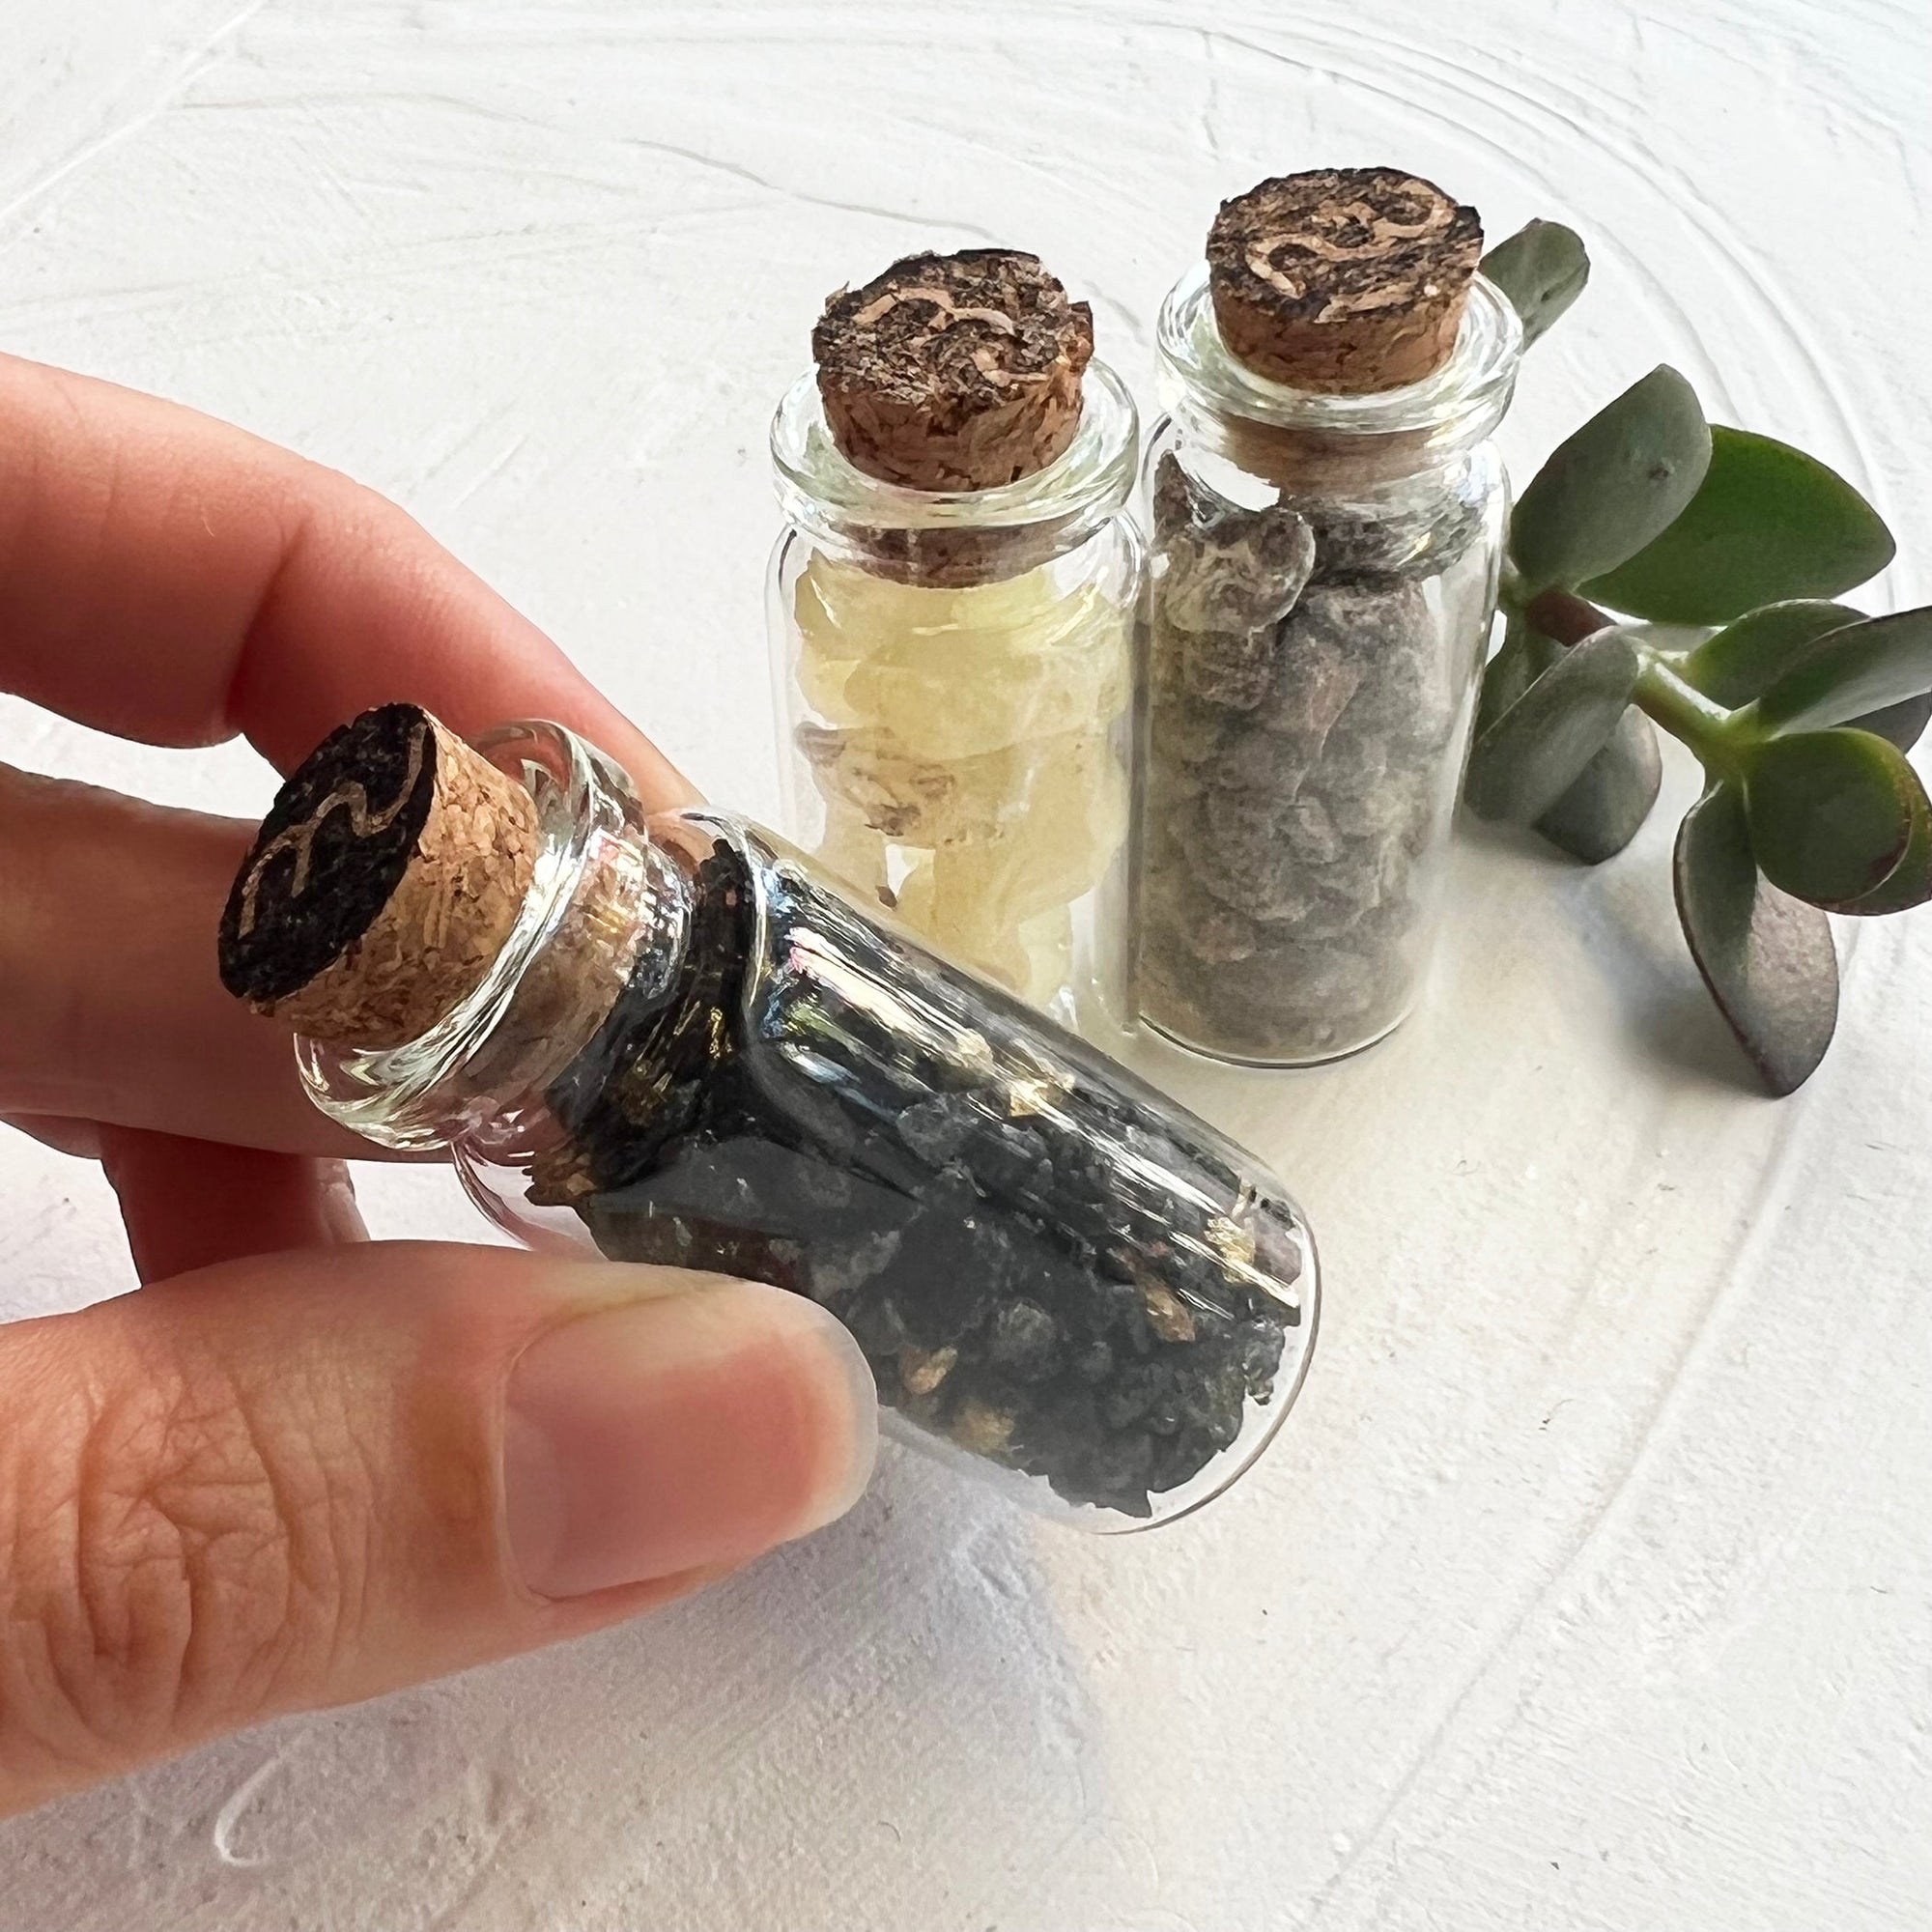 Sun and Moon Resin Incense